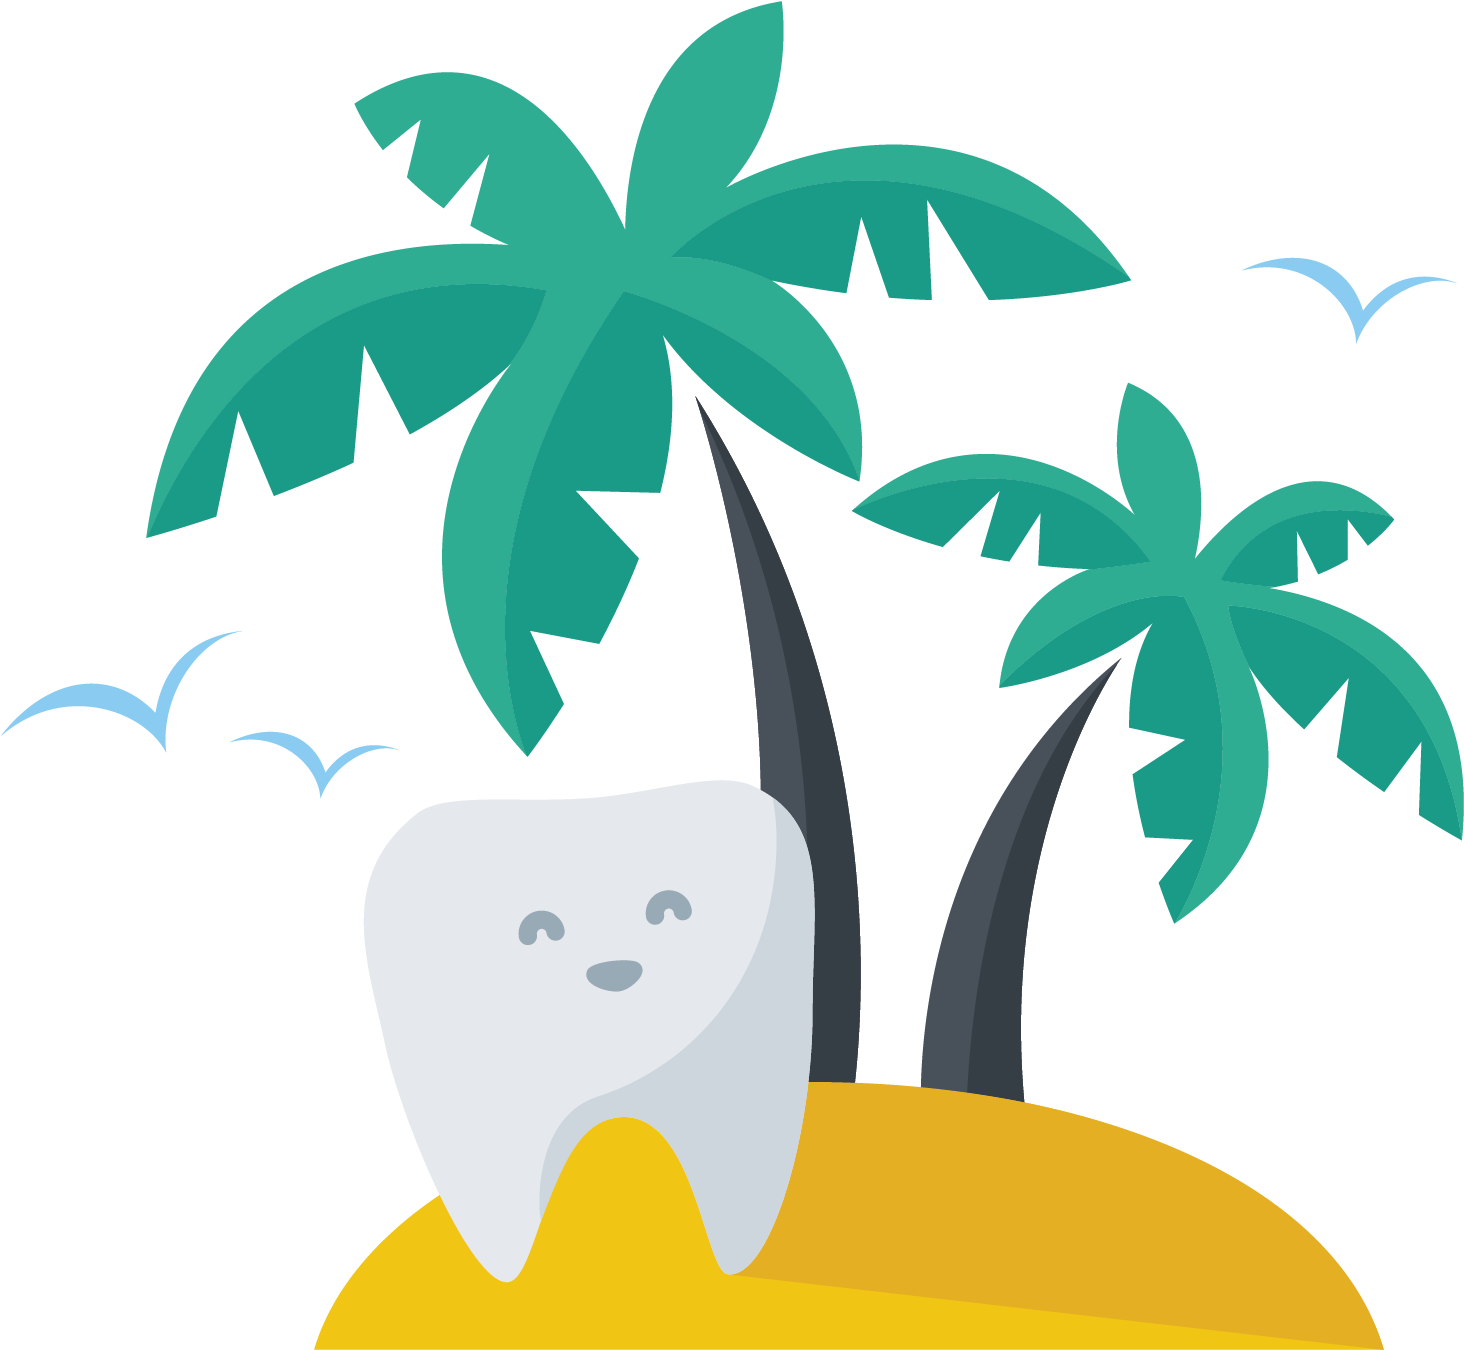 A Cartoon Of A Tooth On A Beach With Palm Trees